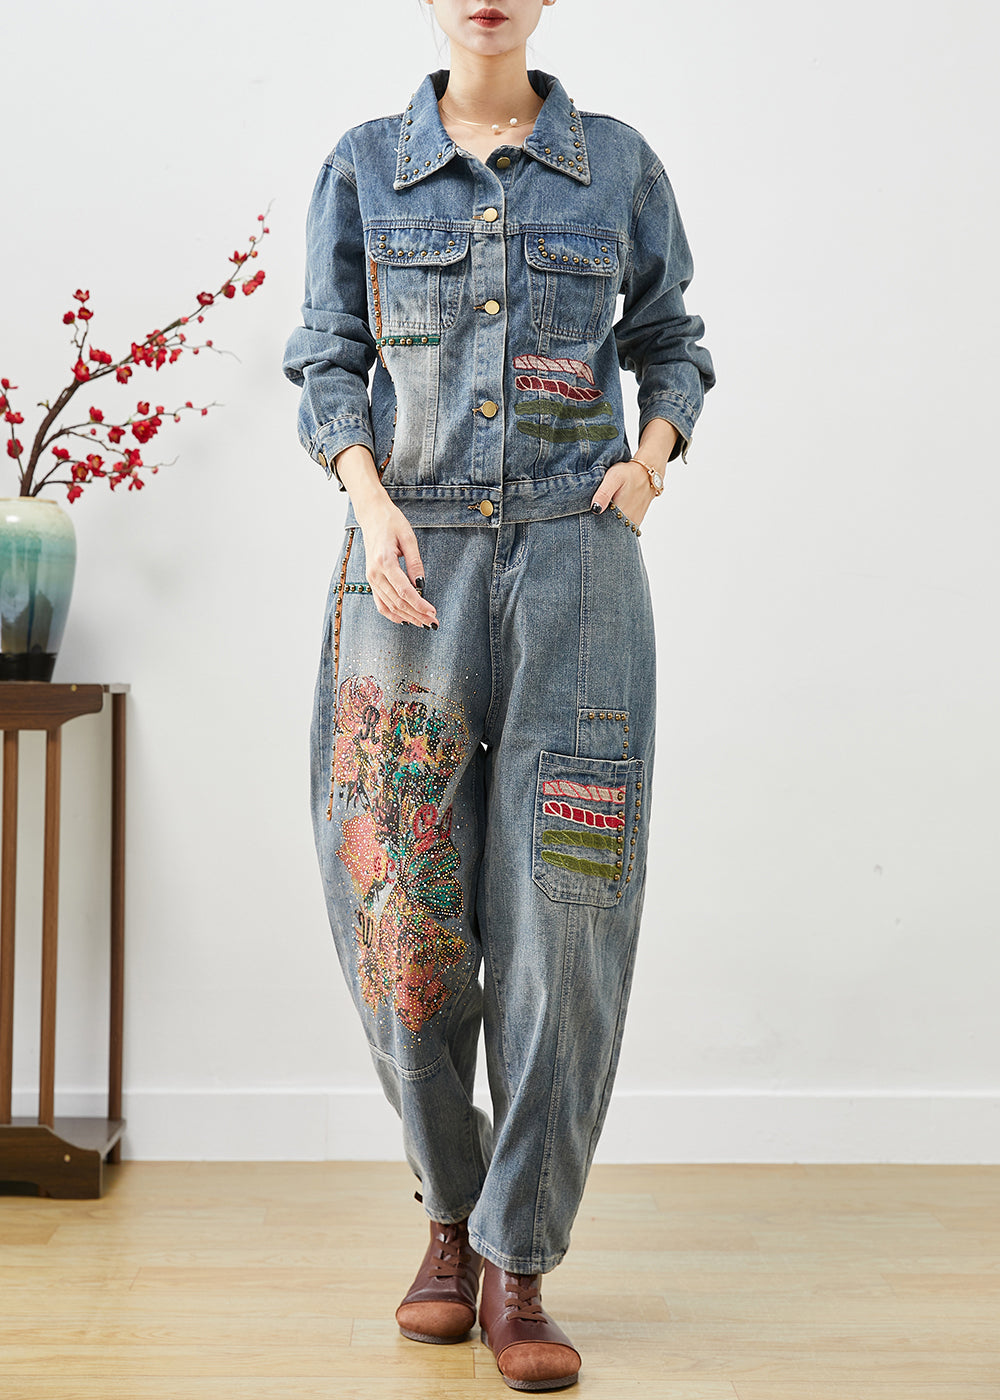 Art Blue Embroidered Print Rivet Denim Two Pieces Set Fall